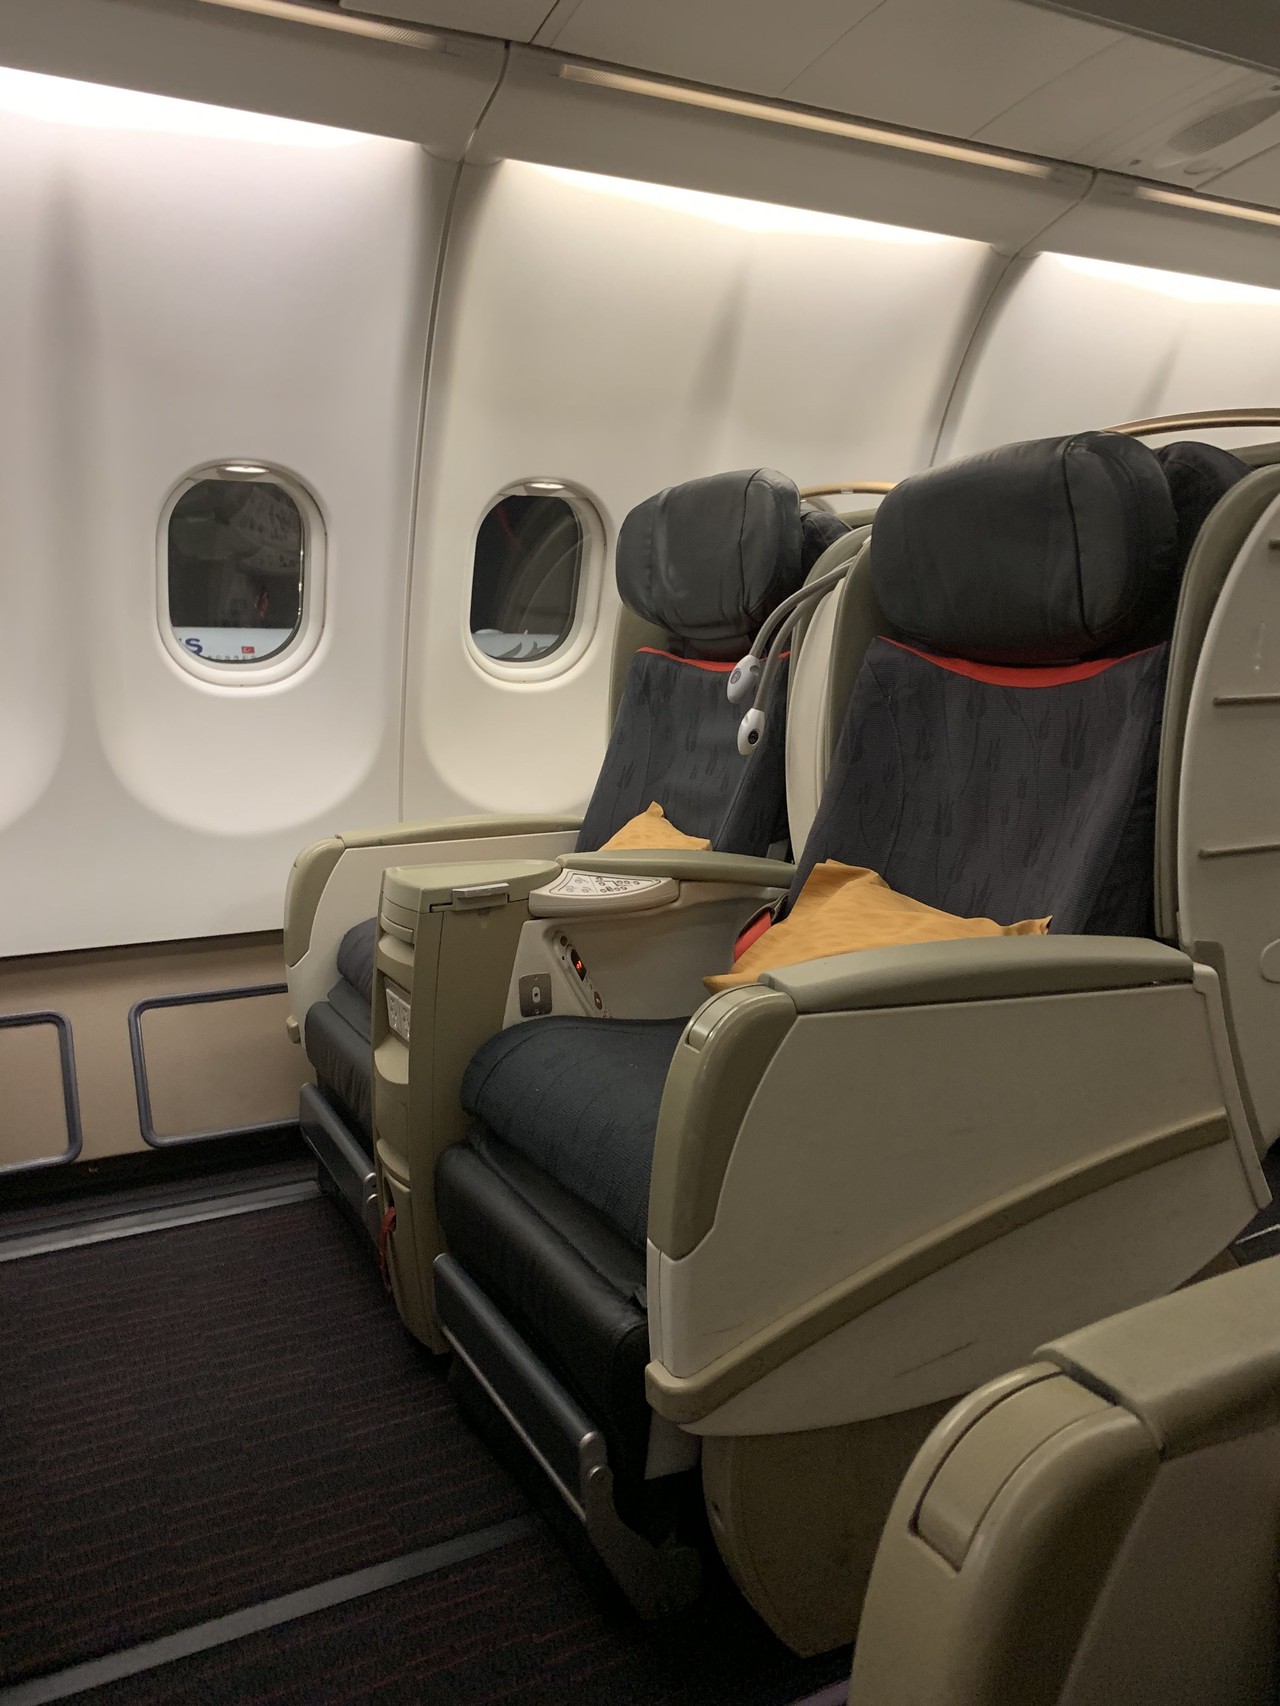 Review of Turkish Airlines flight from Istanbul to Amman in Business